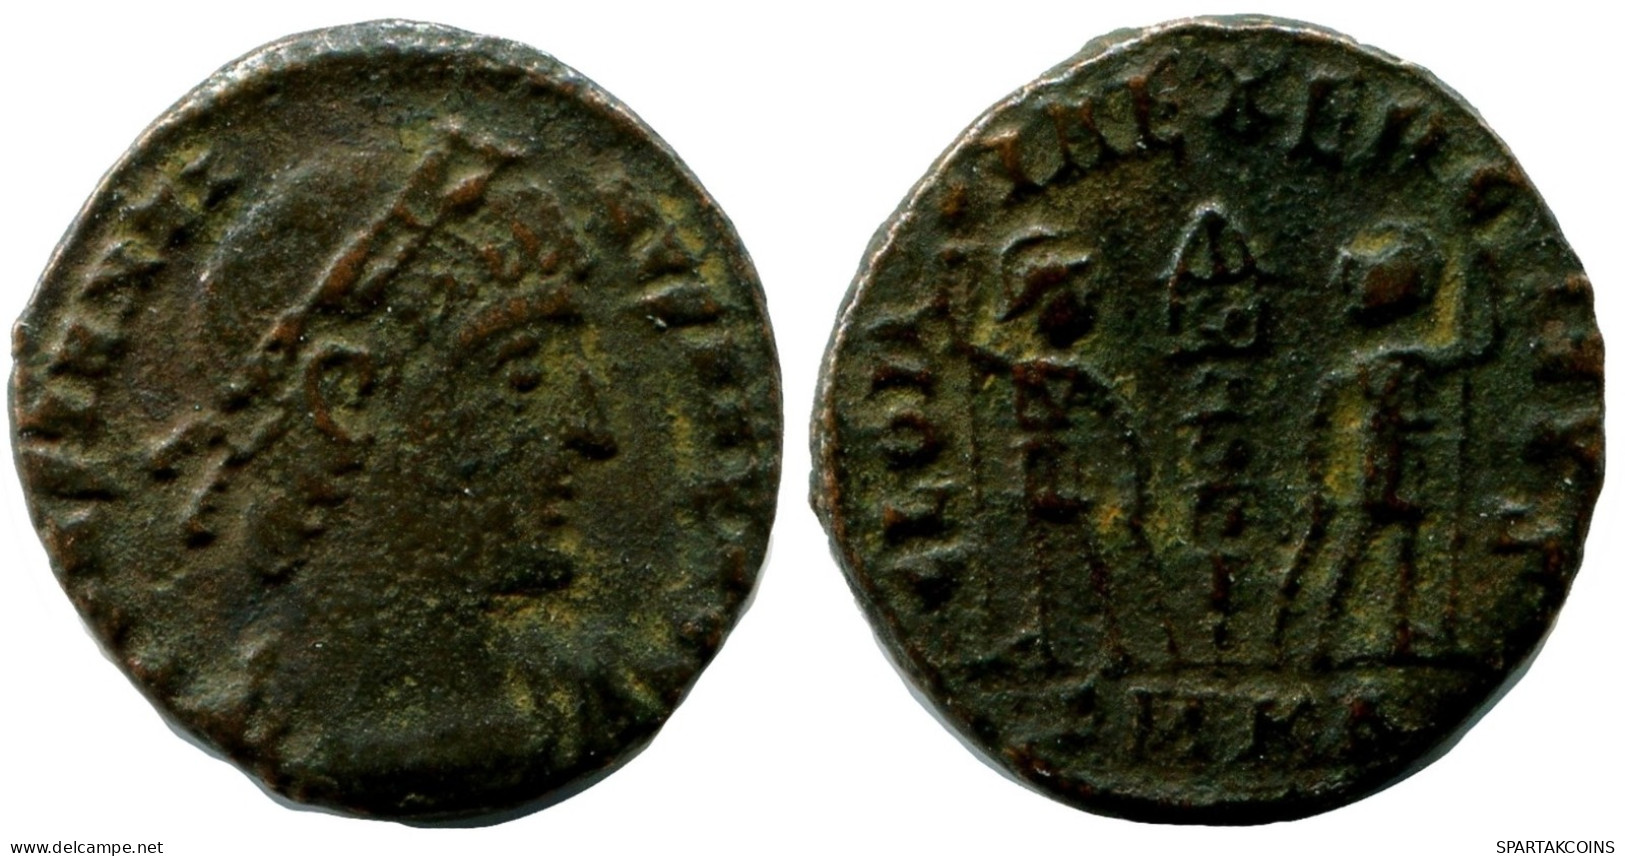 CONSTANTINE I MINTED IN CYZICUS FROM THE ROYAL ONTARIO MUSEUM #ANC11038.14.D.A - Der Christlischen Kaiser (307 / 363)